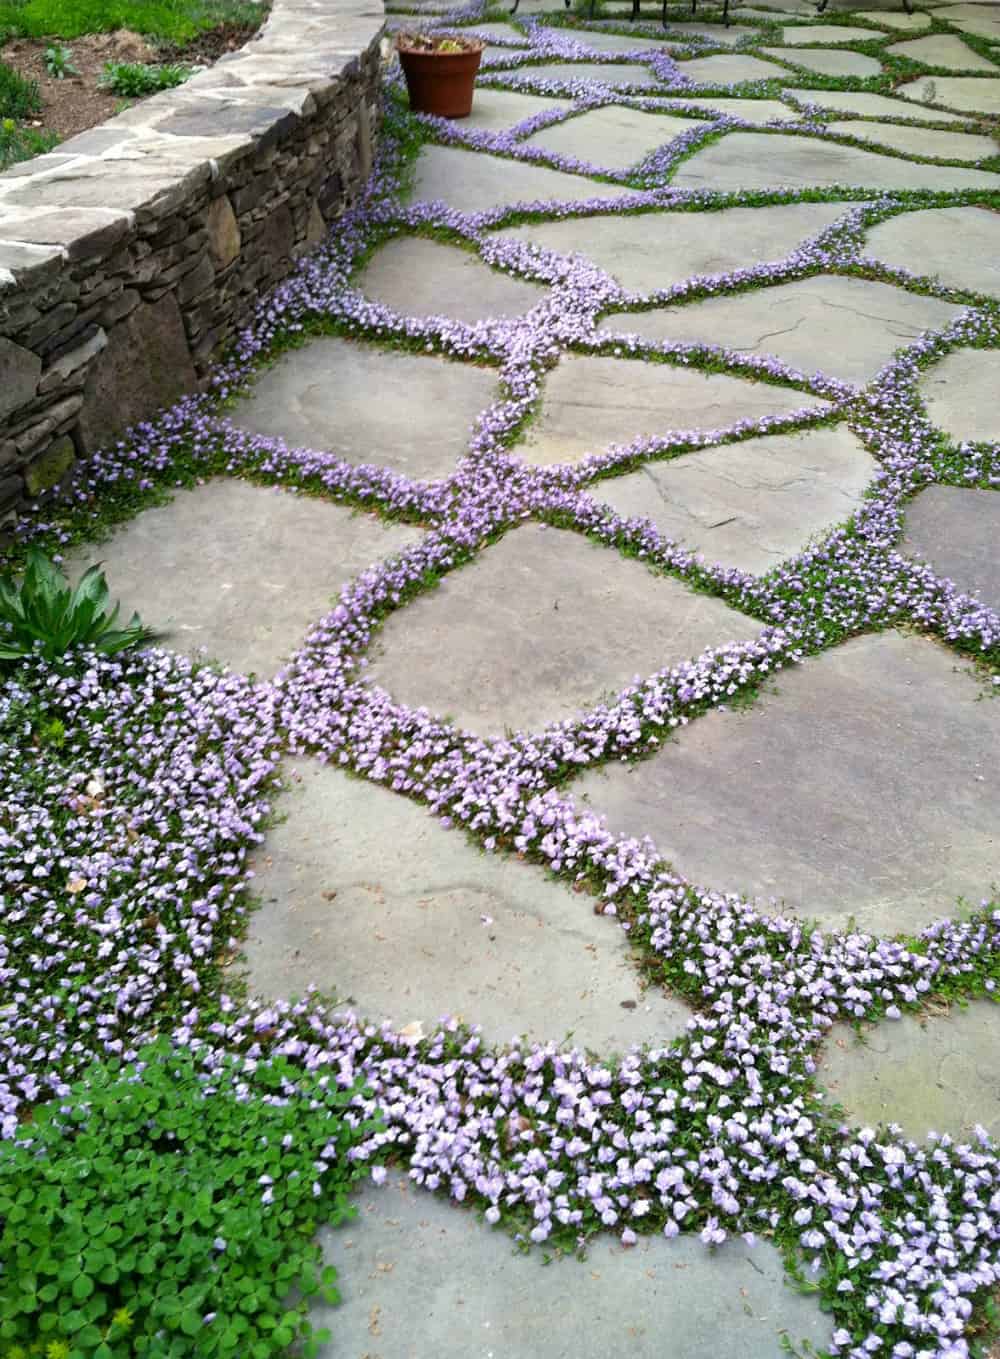 A Charlotte Garden's blooming patio